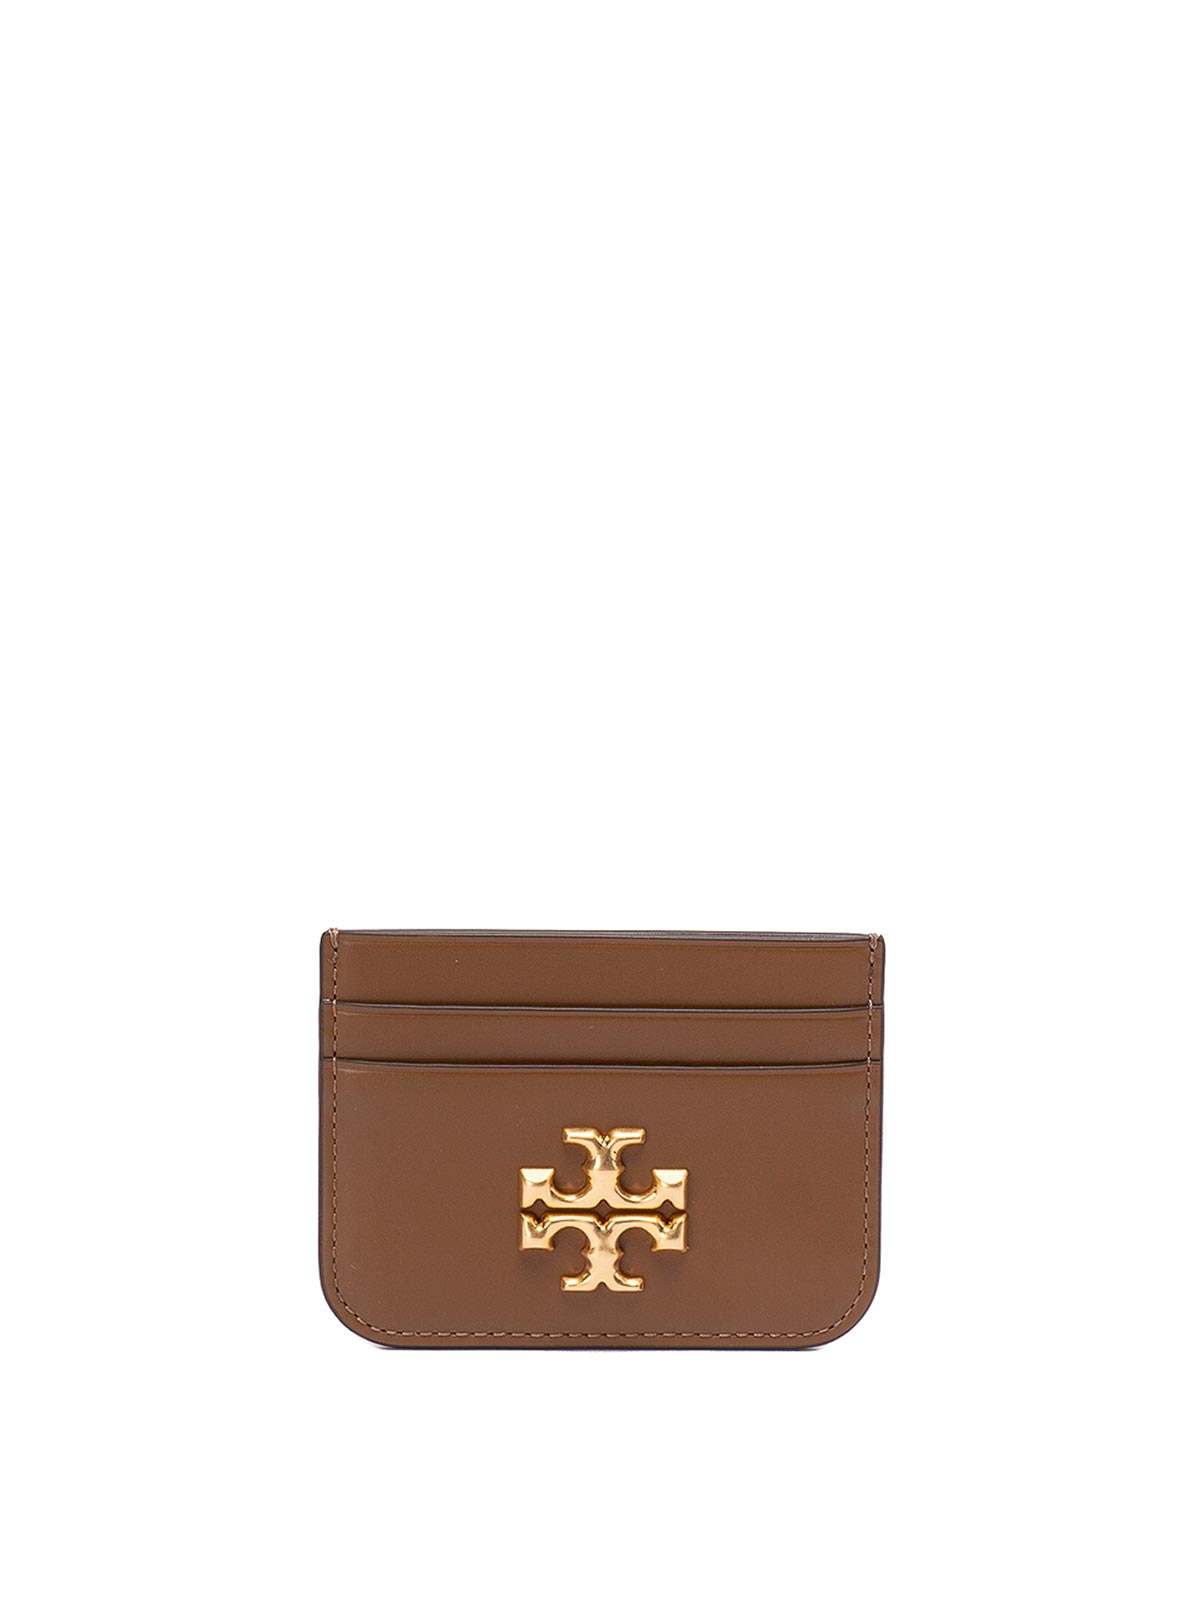 Tory Burch `eleanor` Leather Card Case in Brown